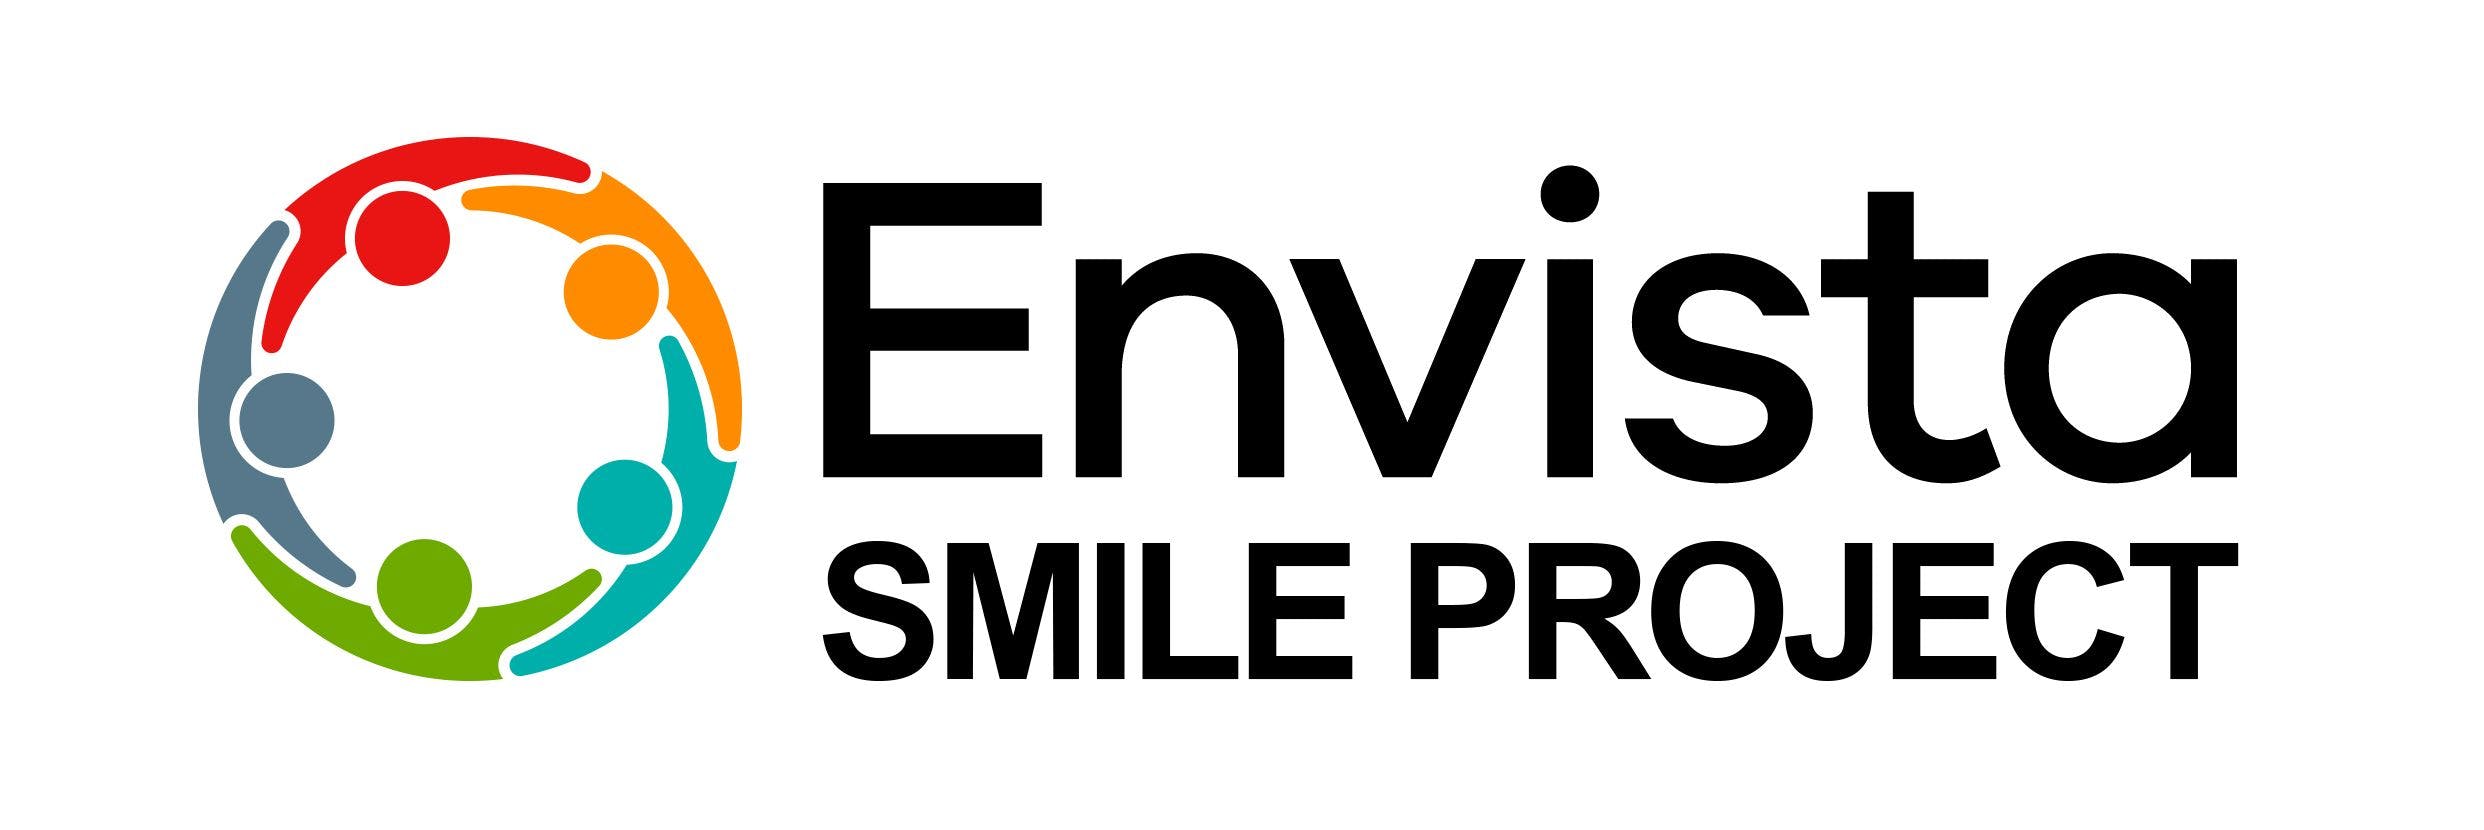 Envista Smile Project, black text on white background